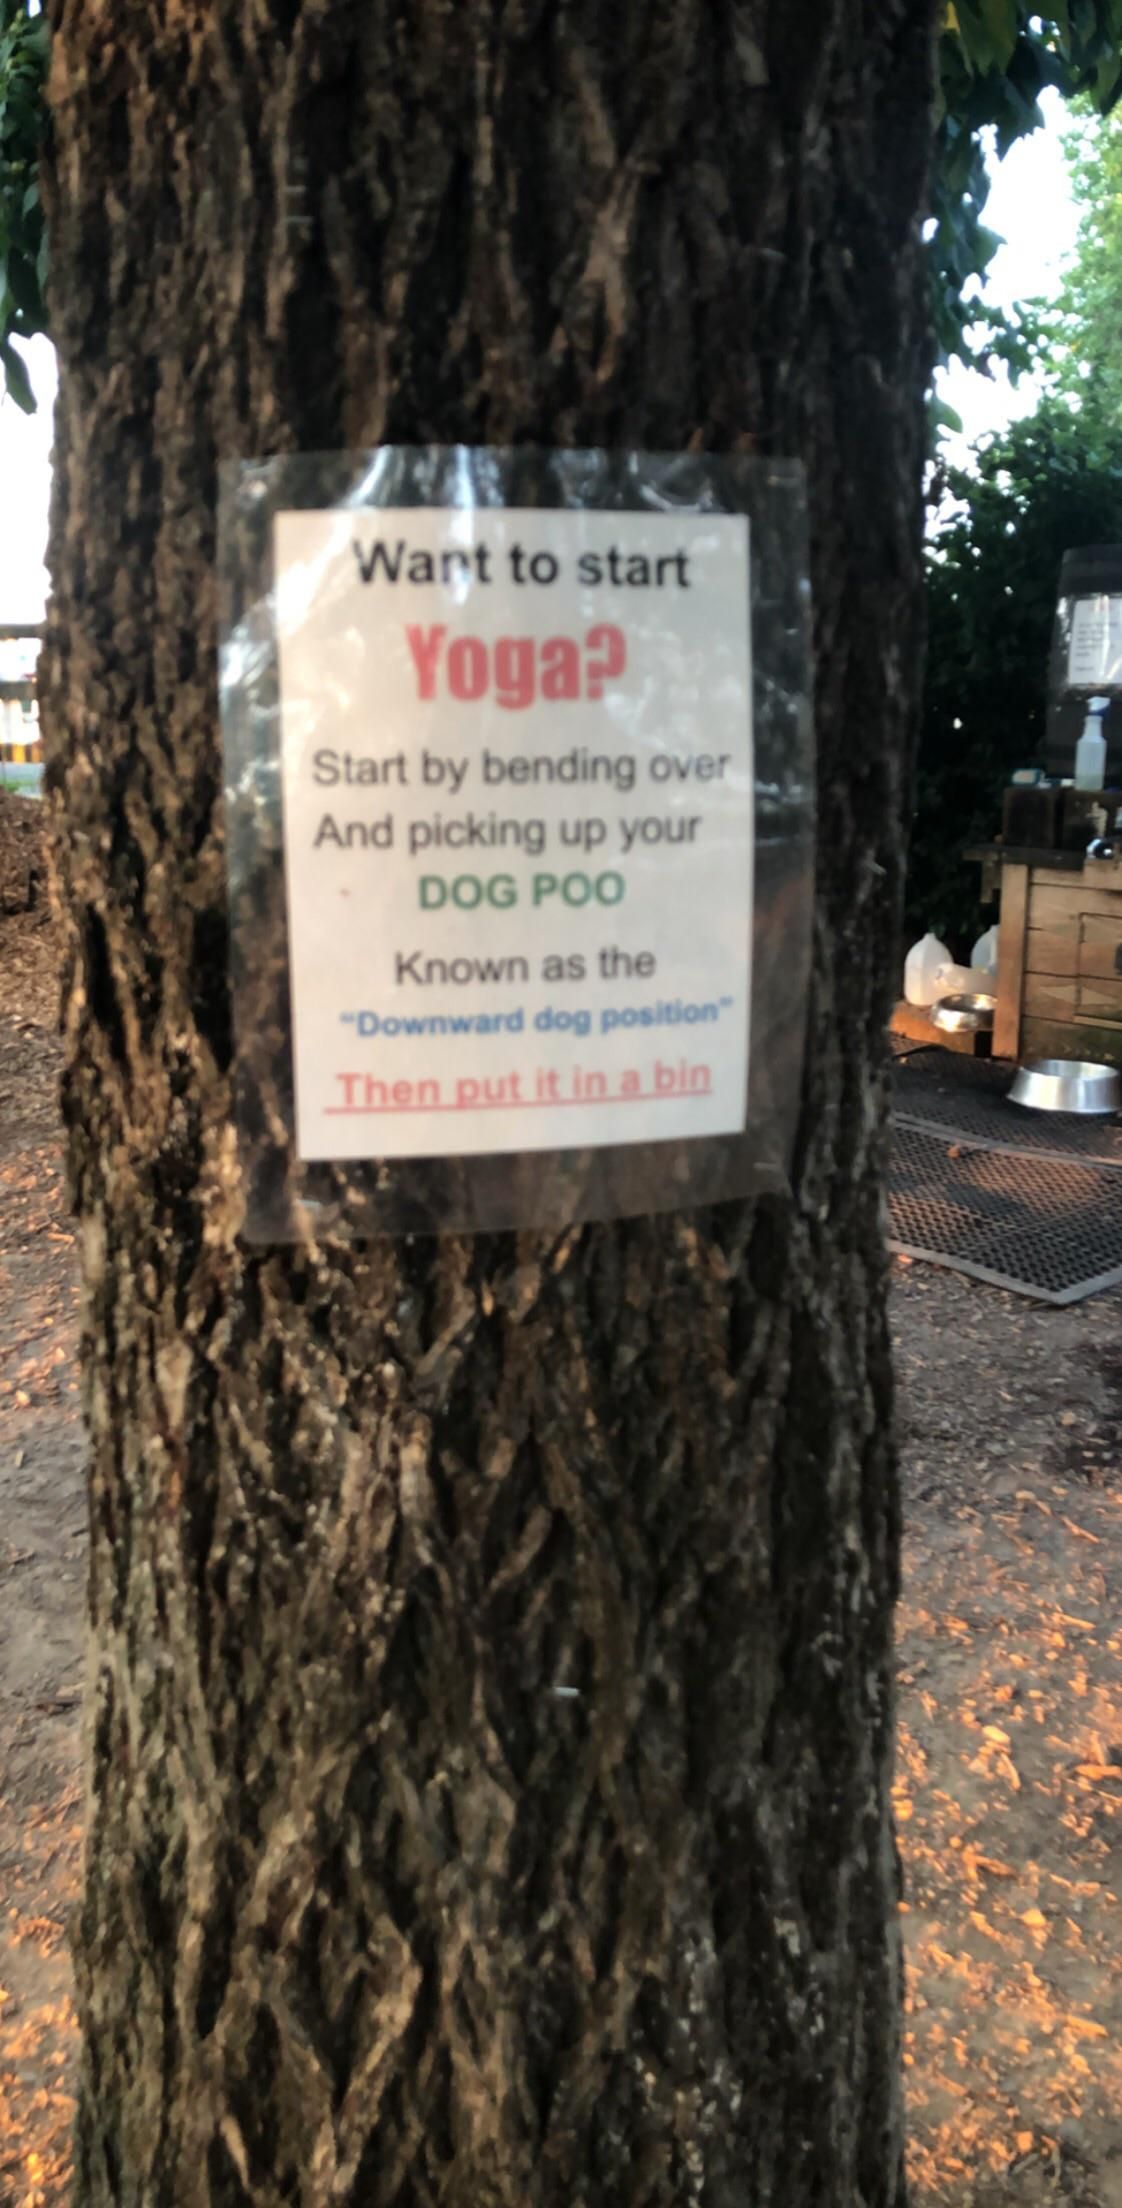 Found this gem at my local dog park.